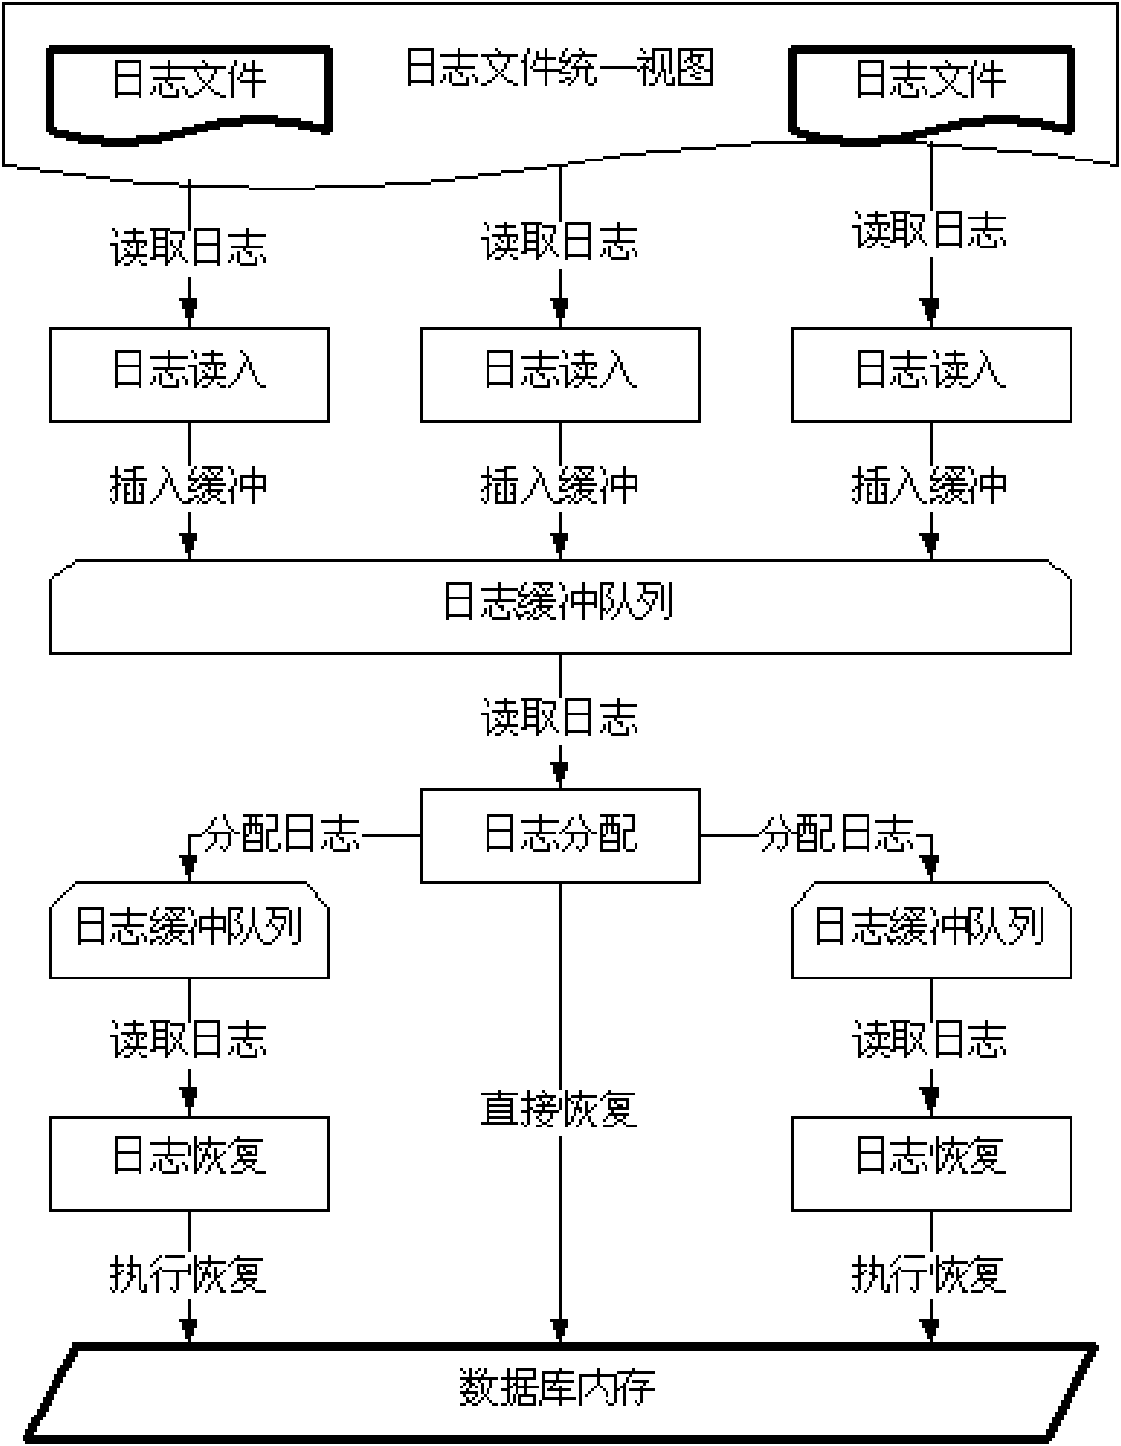 Parallel recovery method of memory database